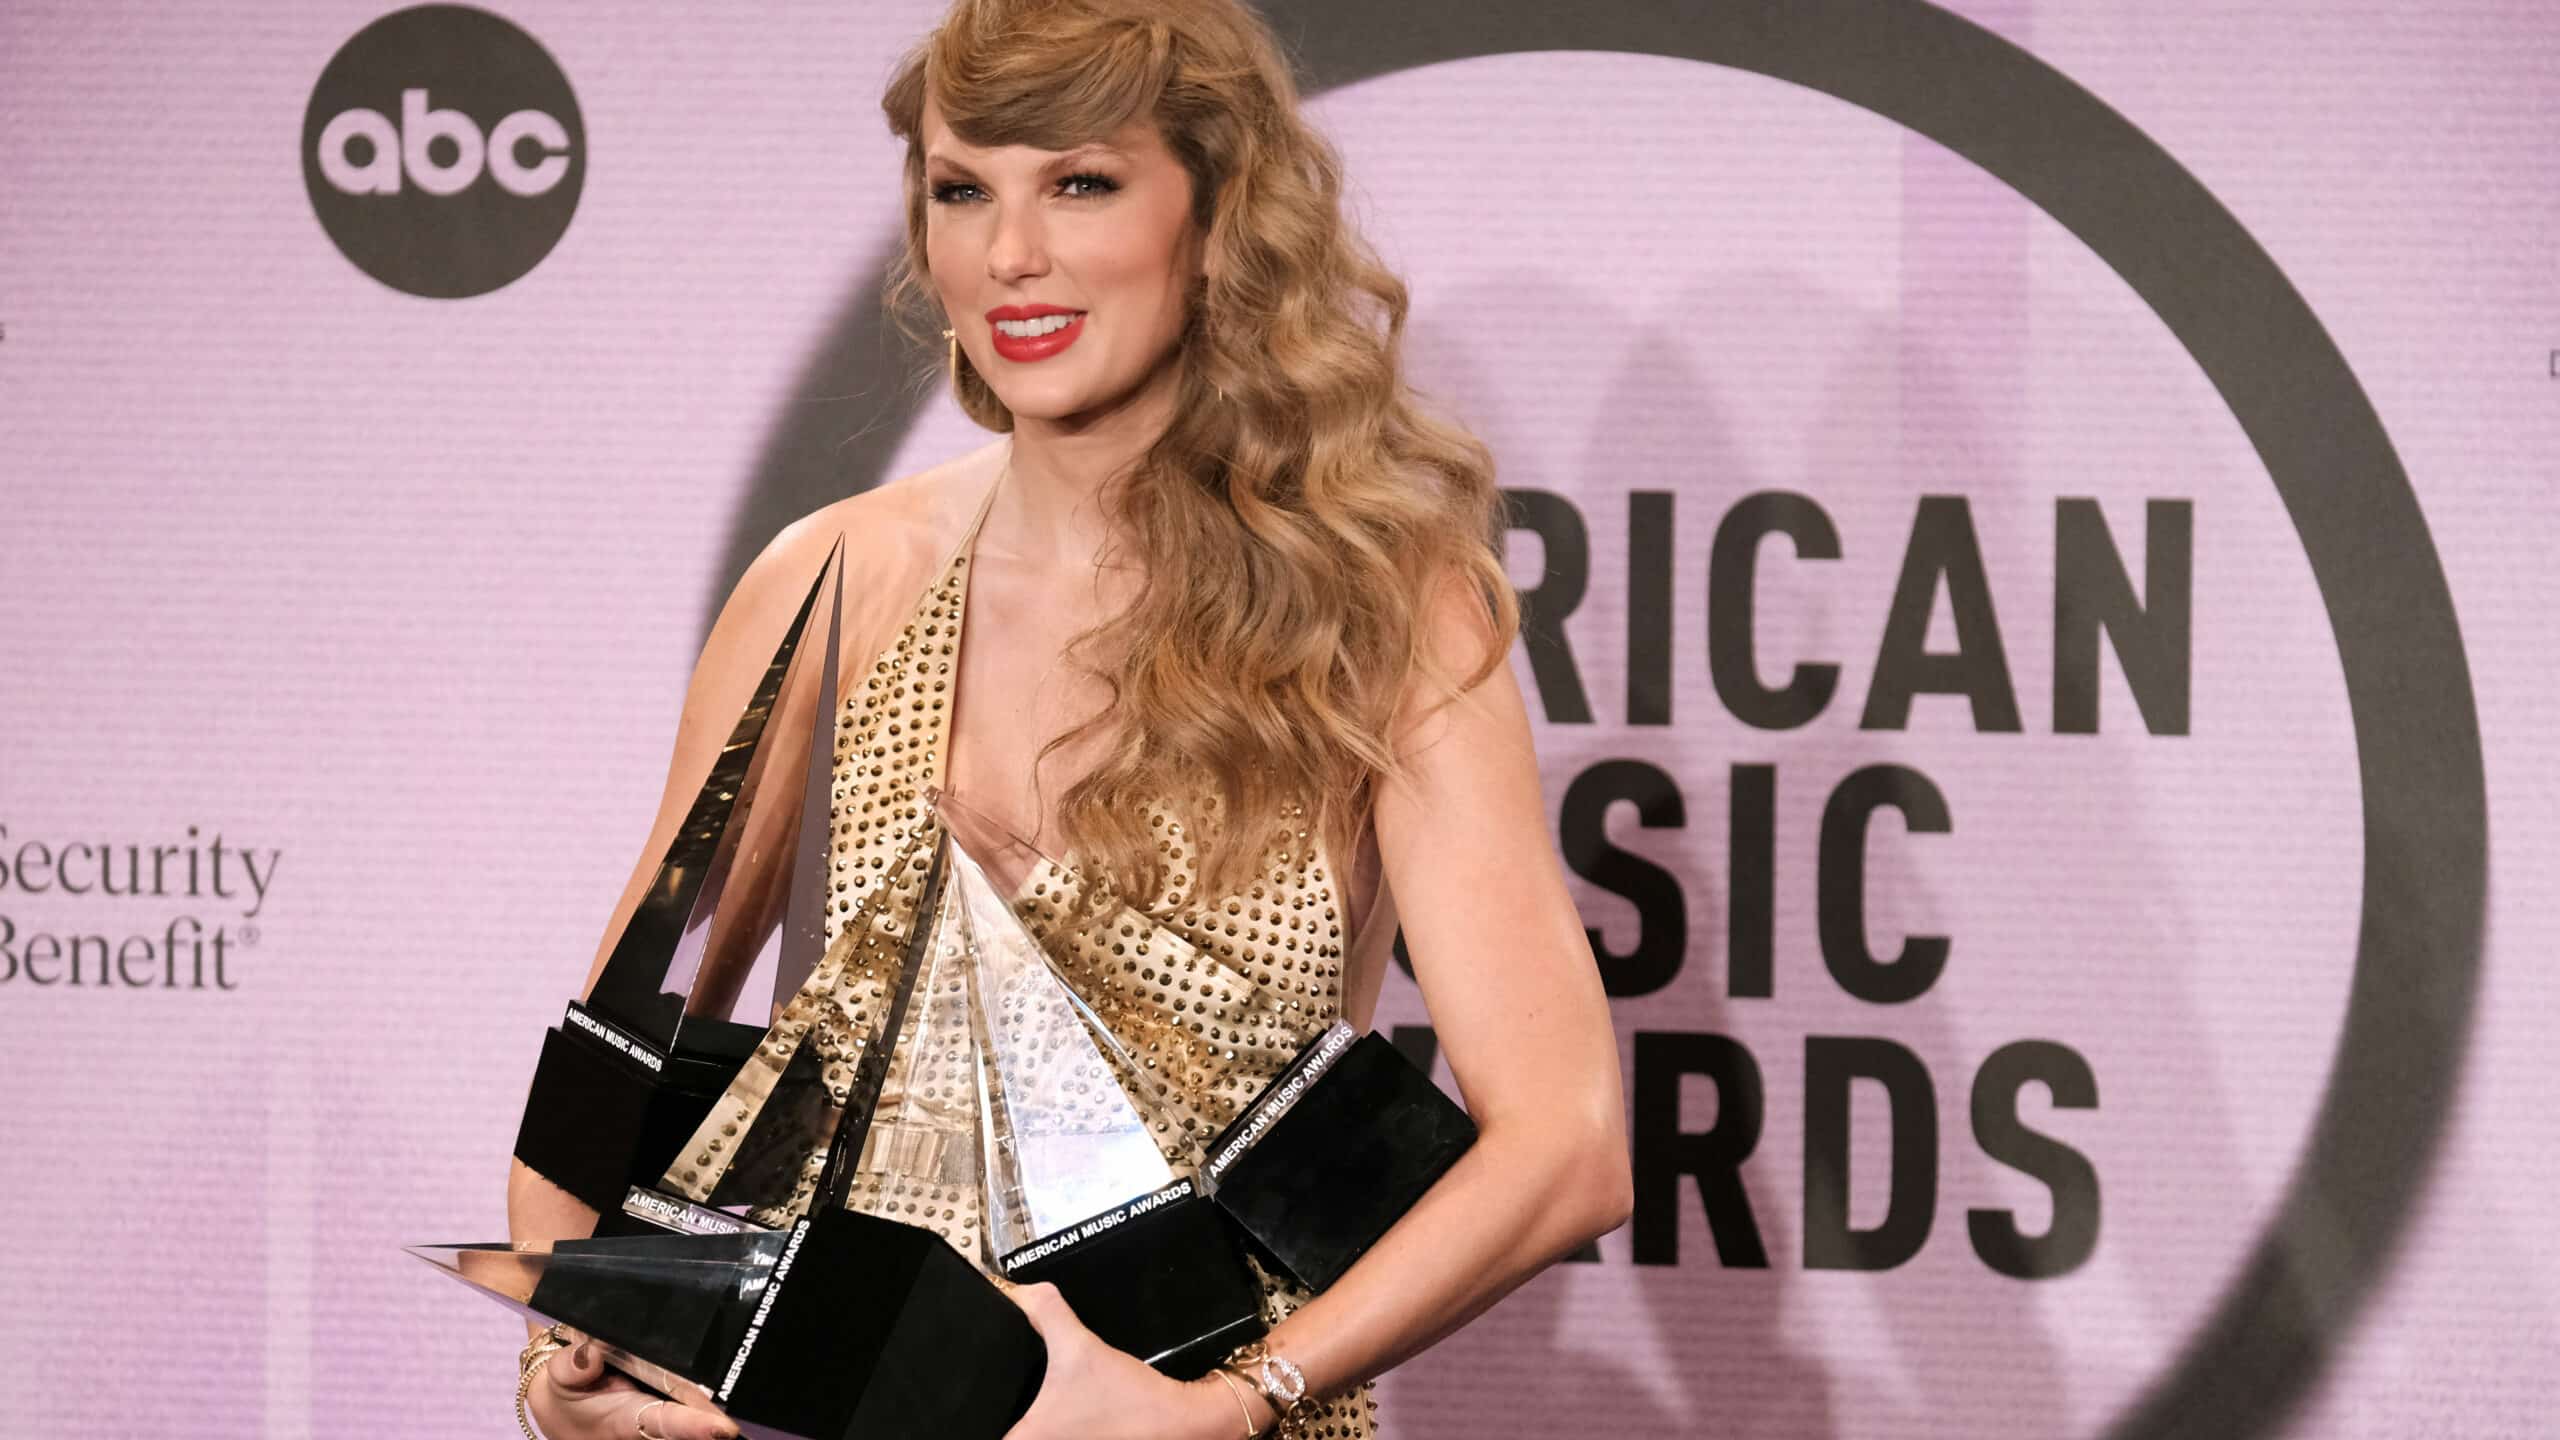 Taylor Swift, winner of Favorite Pop Album, Favorite Female Pop Artist, Favorite Music Video, Favorite Country Album, Favorite Female Country Artist, and Artist of the Year, poses in the press room at the 2022 American Music Awards at Microsoft Theater on November 20, 2022 in Los Angeles, California.